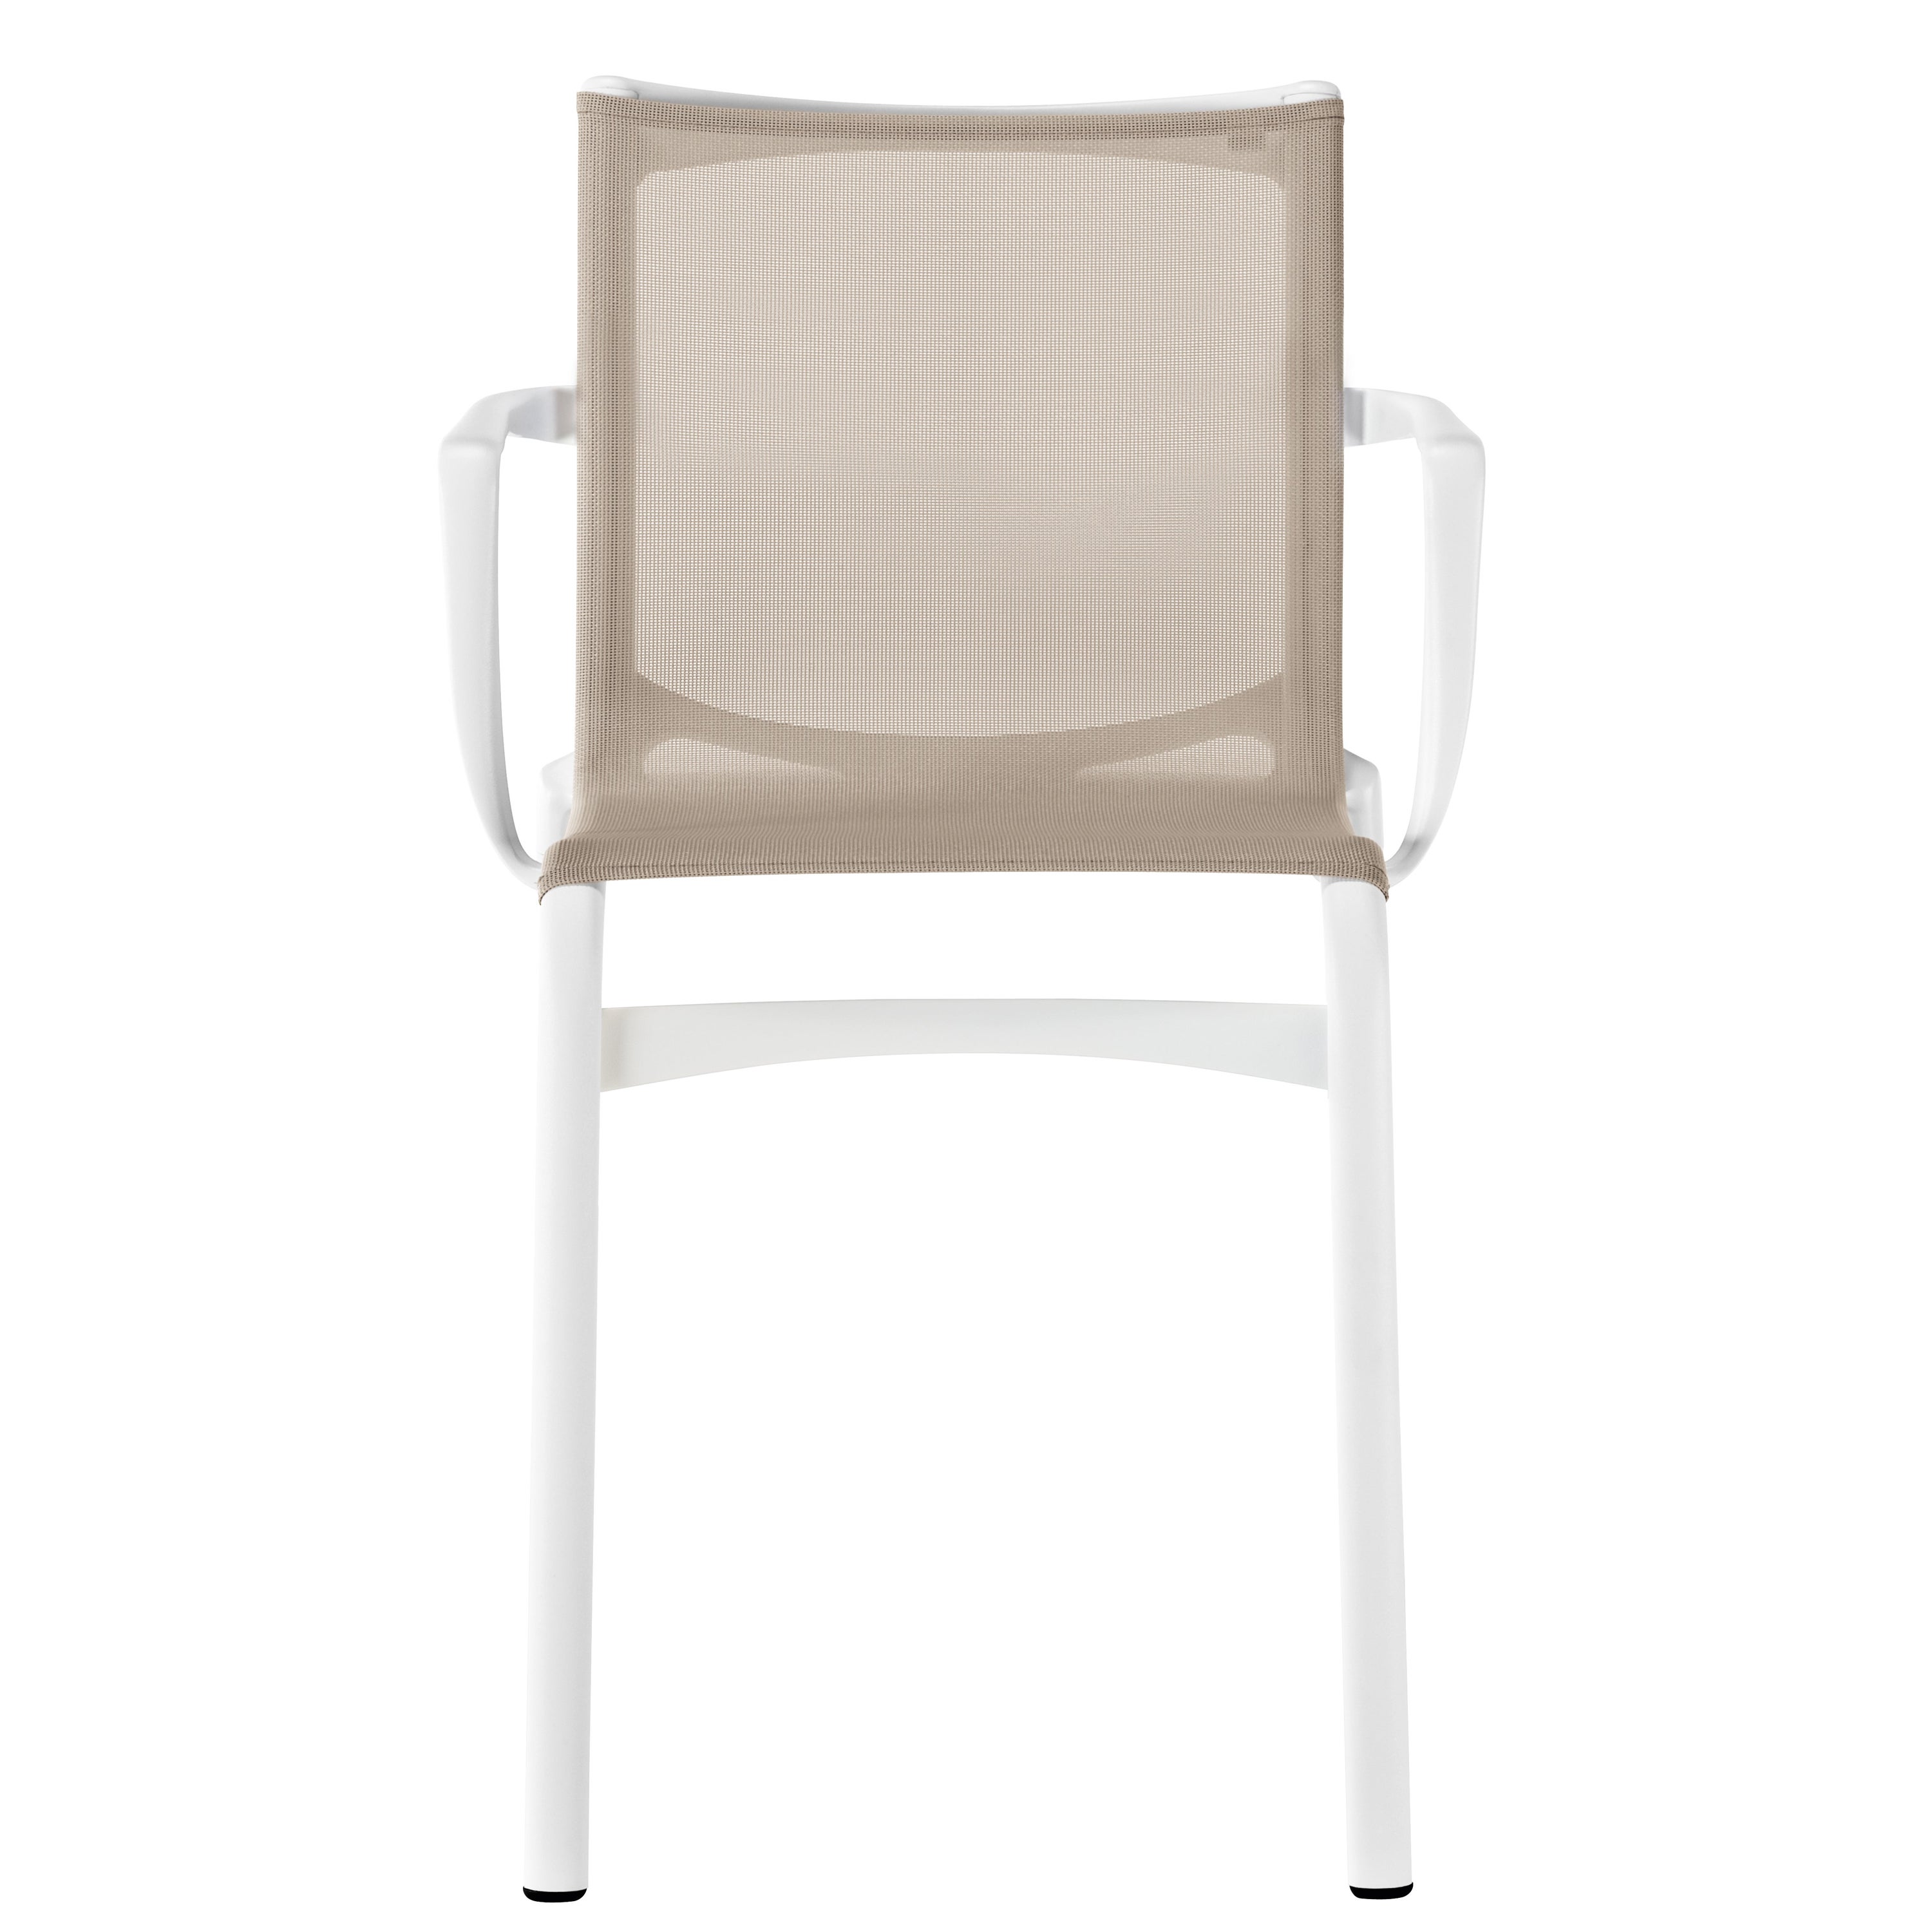 Alias 417 Highframe 40 Chair in Sand Mesh with White Lacquered Aluminium Frame